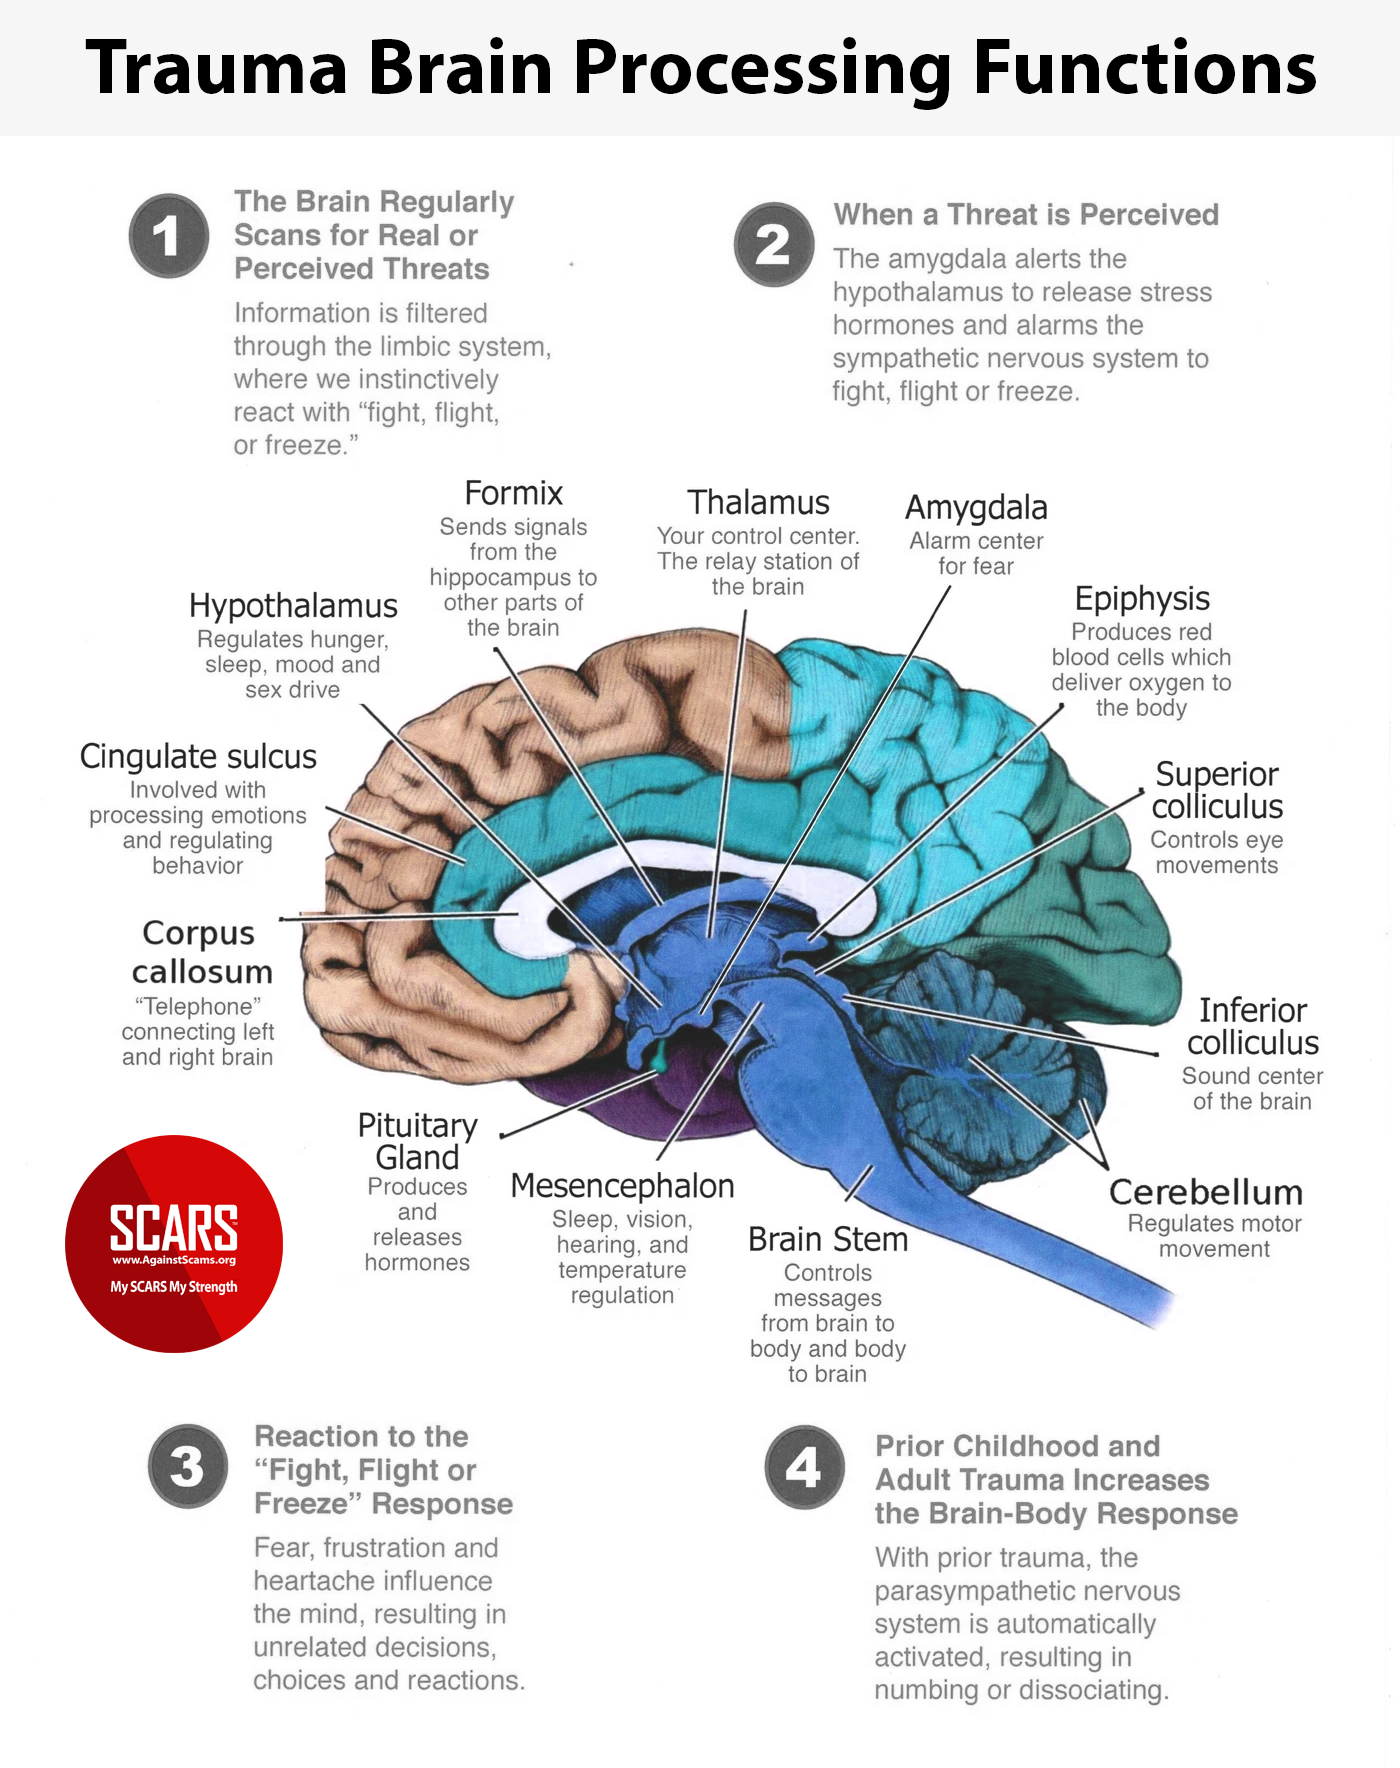 Trauma - Brain Processing Functions - Infographic 1